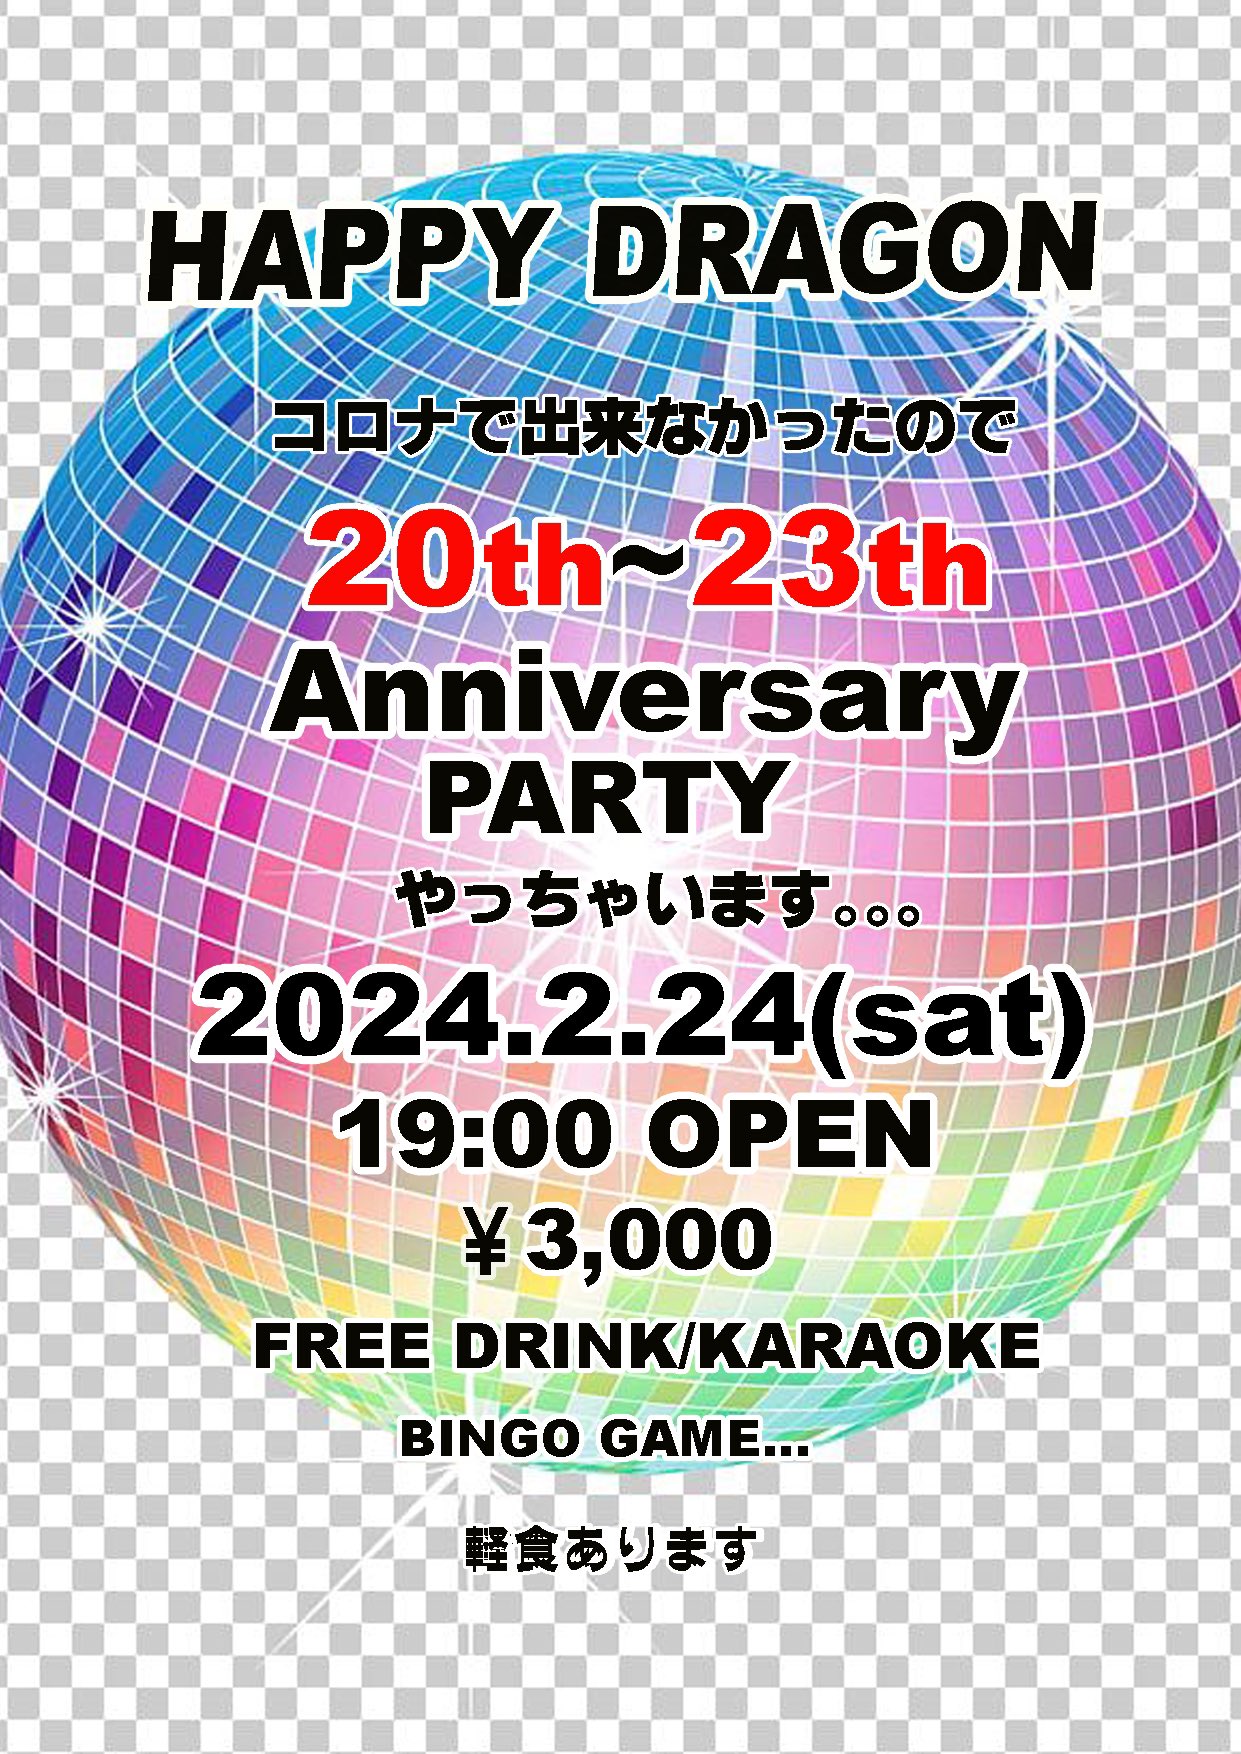 20th ～ 23th Anniversary PARTY